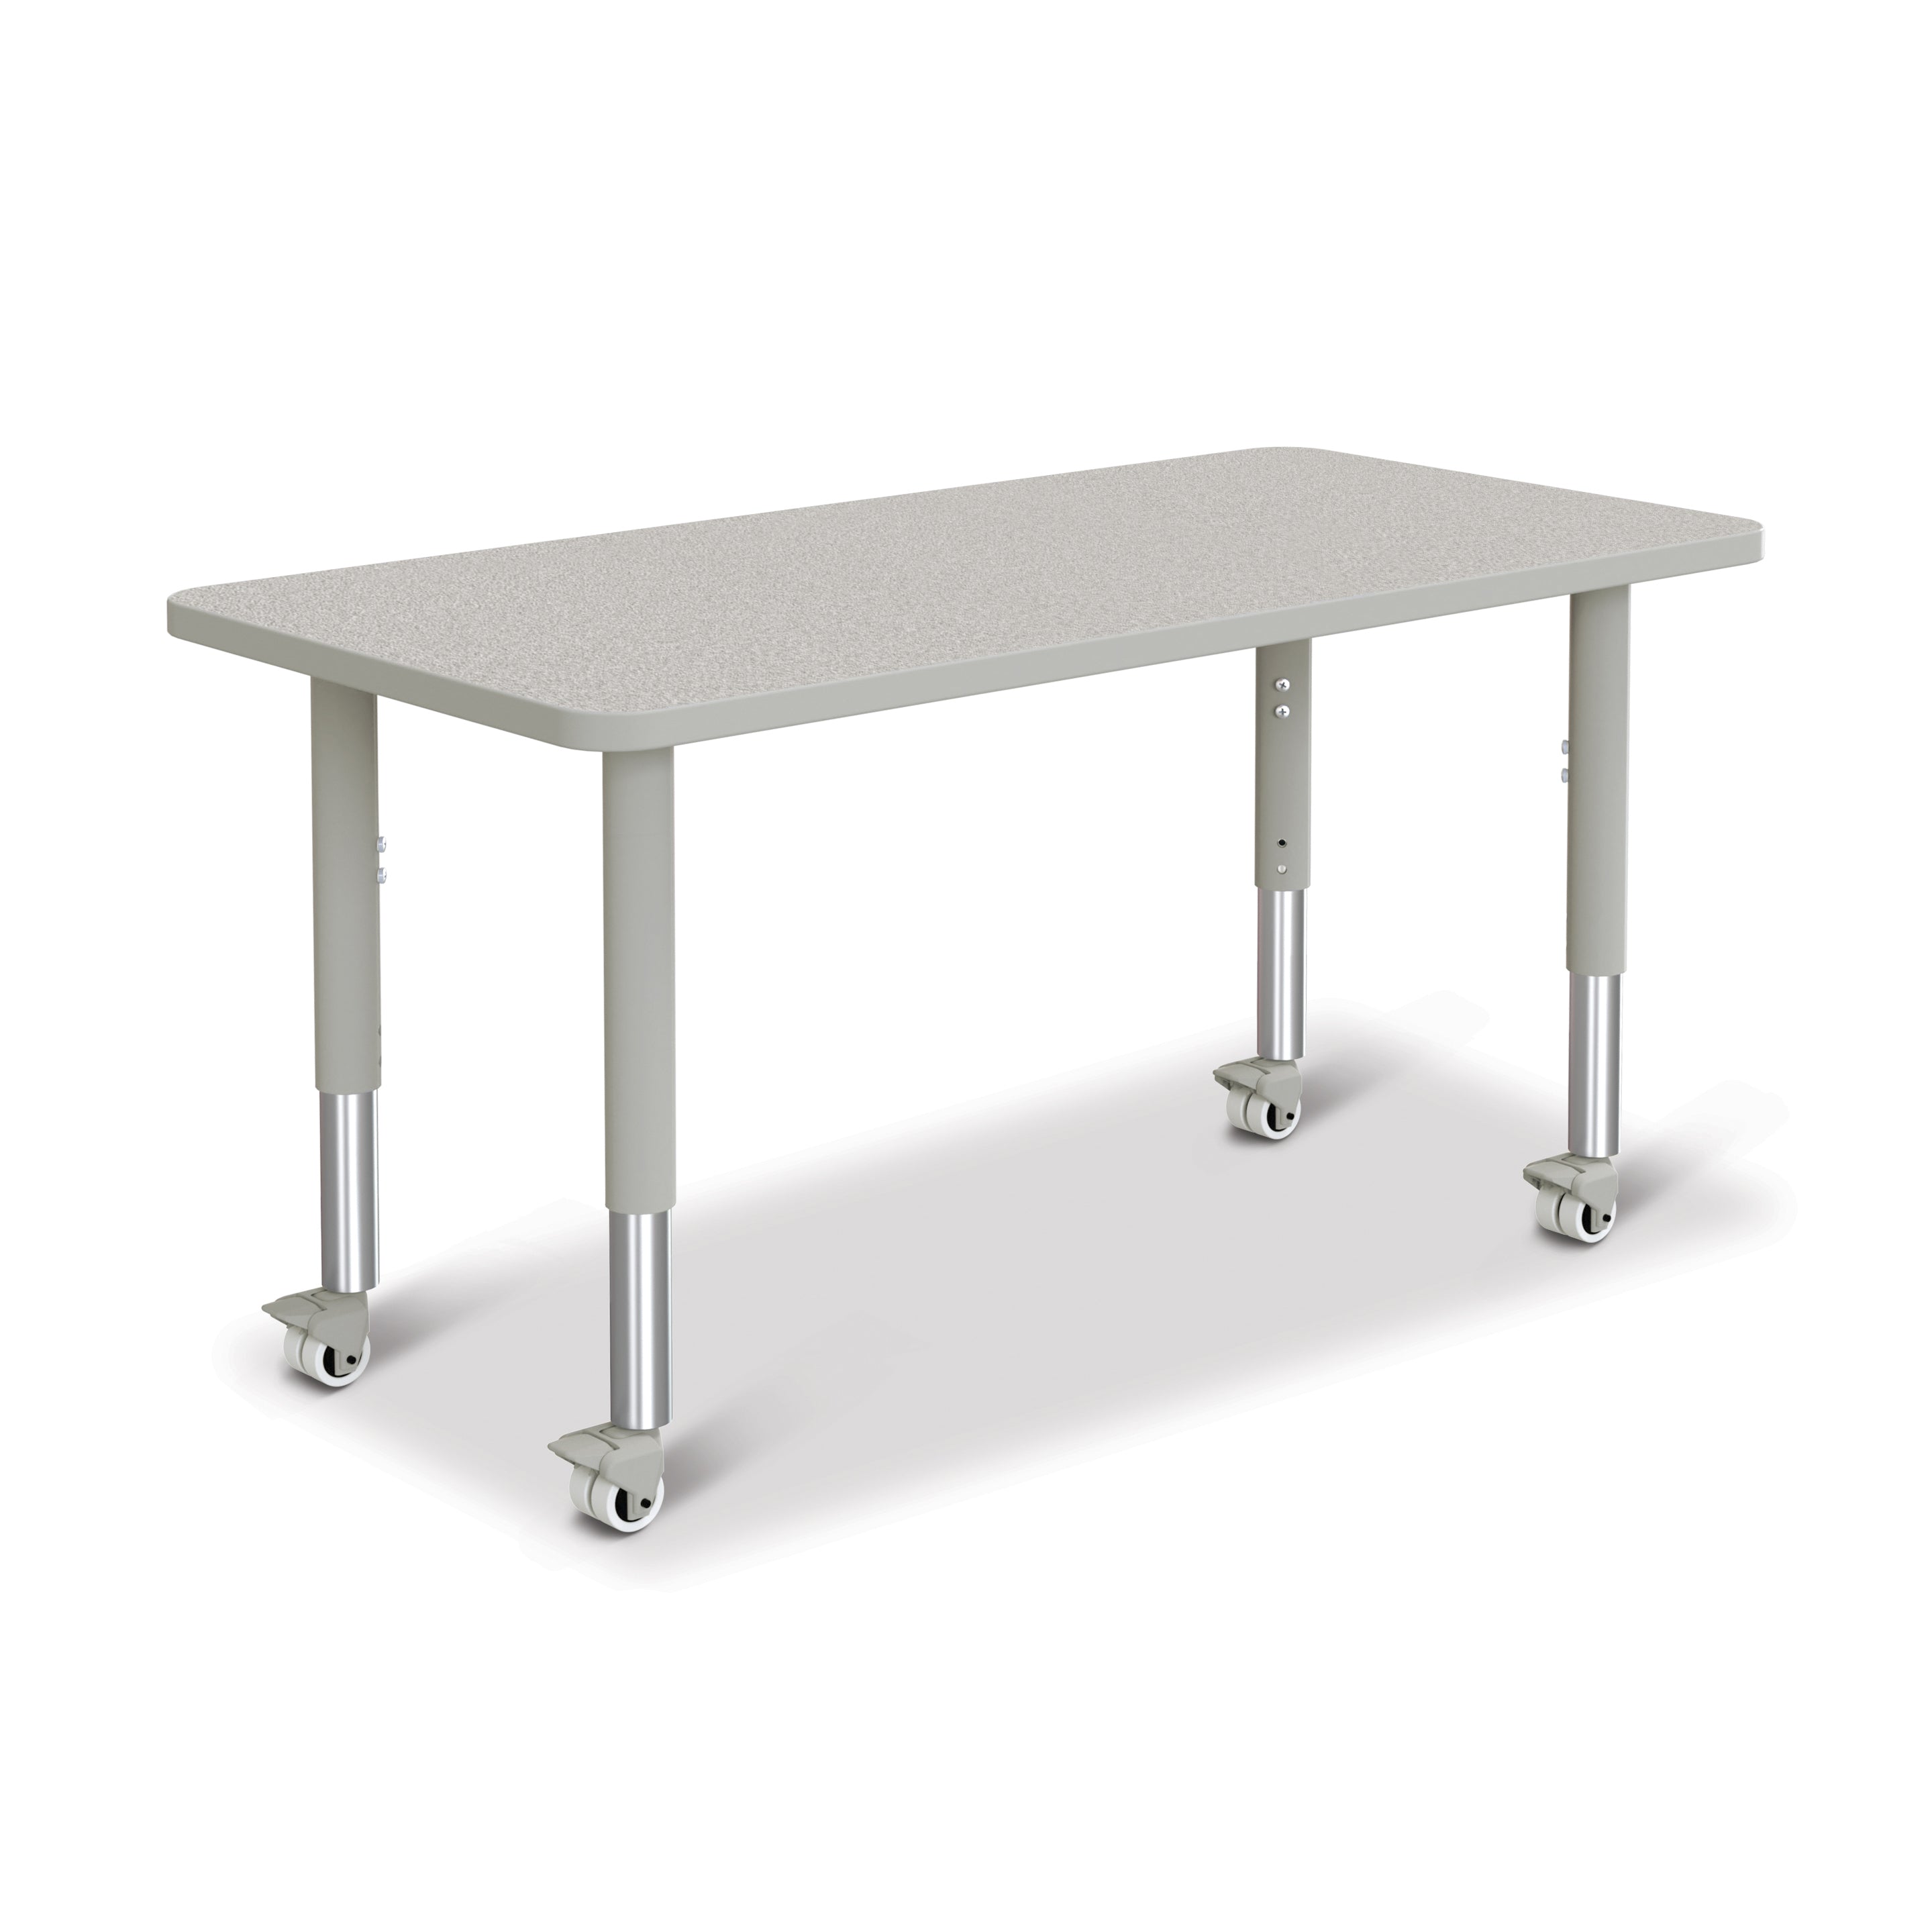 6403JCM000, Berries Rectangle Activity Table - 24" X 48", Mobile - Freckled Gray/Gray/Gray